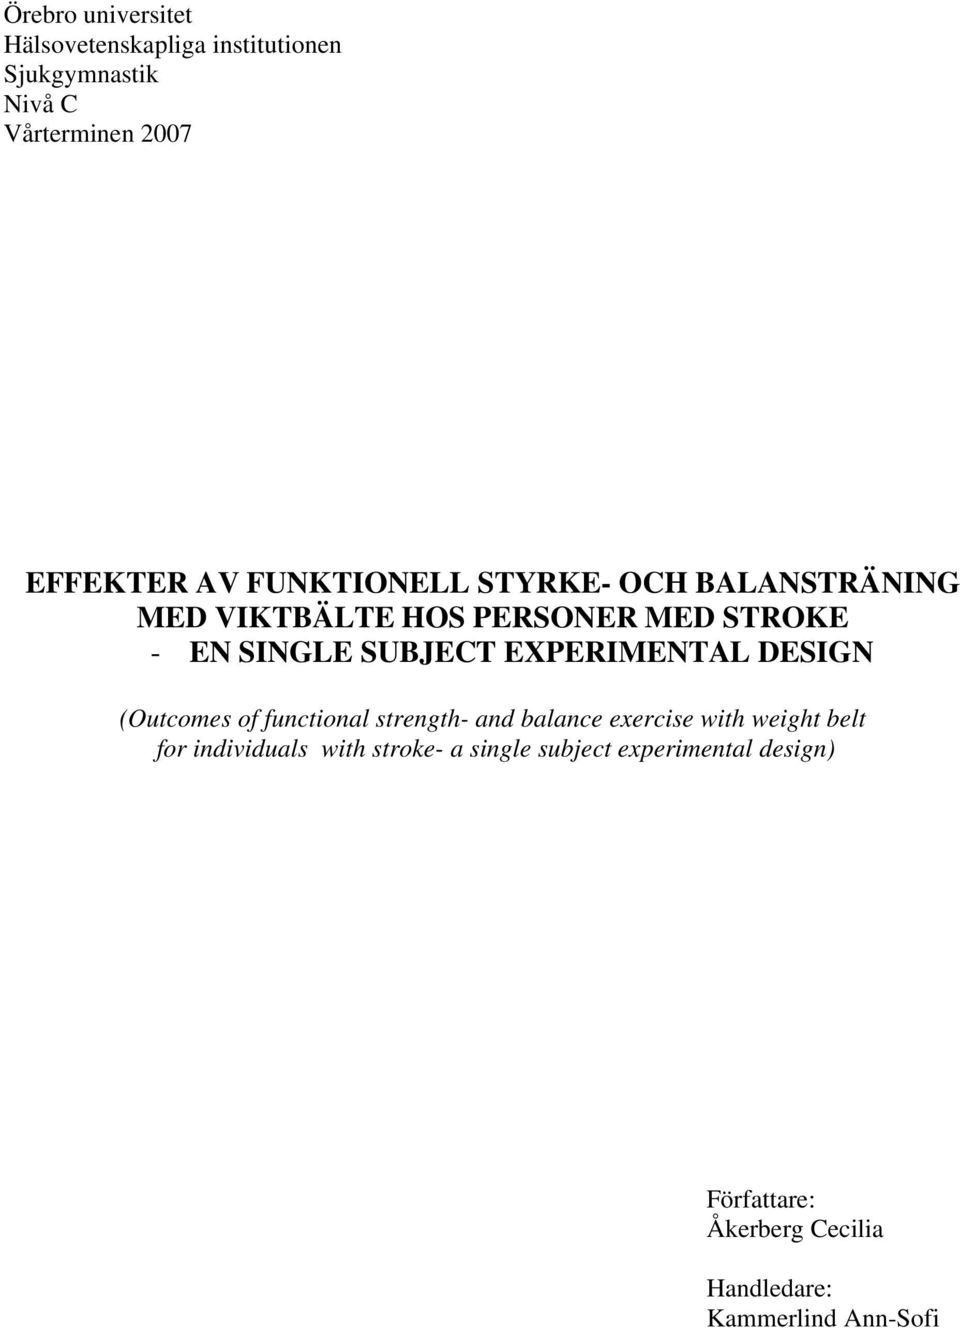 EXPERIMENTAL DESIGN (Outcomes of functional strength- and balance exercise with weight belt for